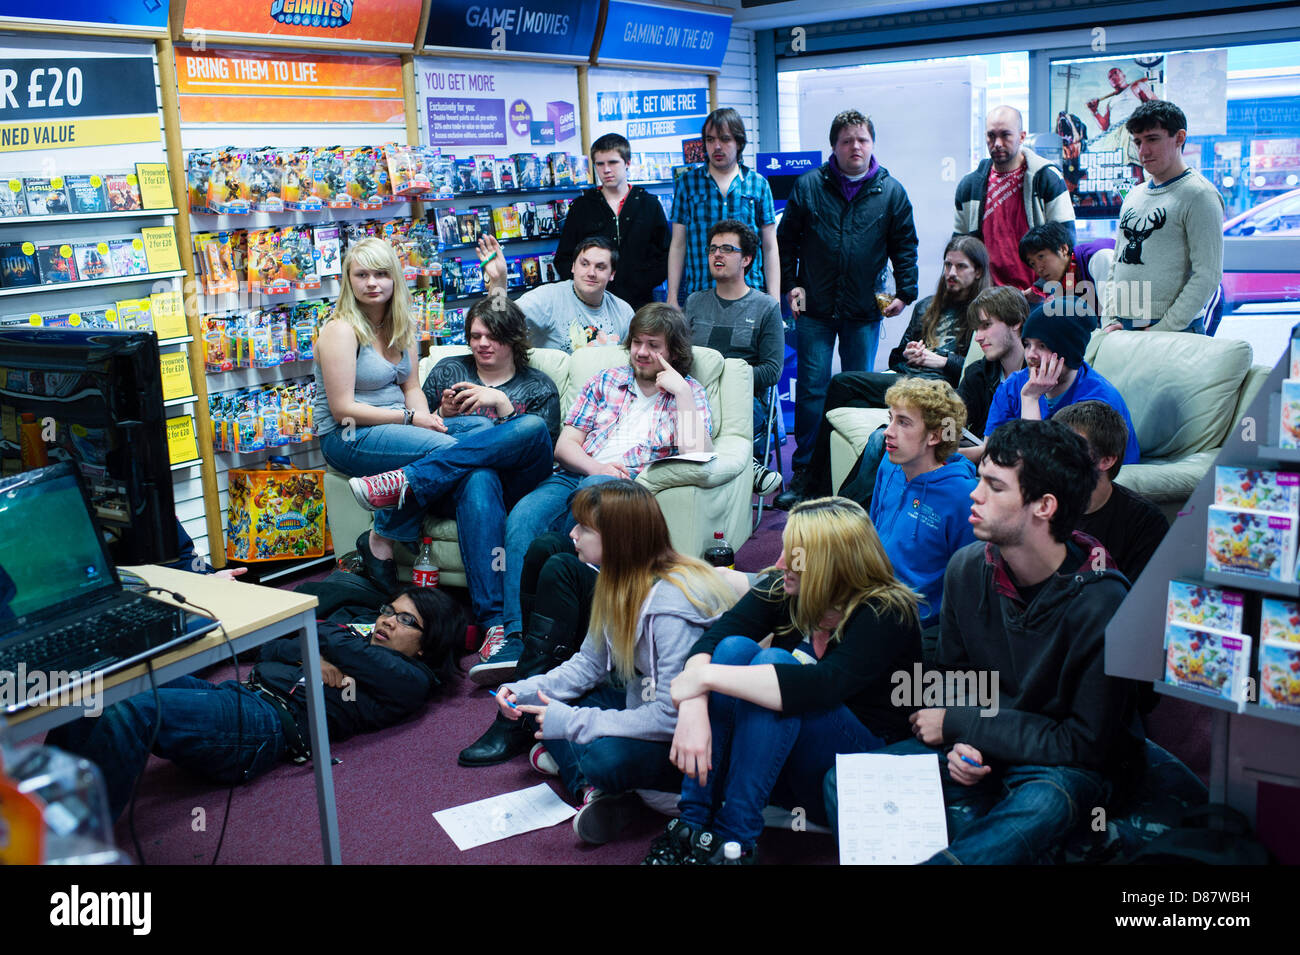 Aberystwyth, Wales, UK.  May 21 2013.   A group of avid games players at the Aberystwyth branch of Game (the high street video and computers games retailer) watching the live streaming of the announcement of the new Microsoft games console, the XBox1. The new console has 8gb of RAM and 5 billion transistors, and has full body tracking, including wrist and shoulders.  photo Credit:  Keith Morris/Alamy Live News Stock Photo